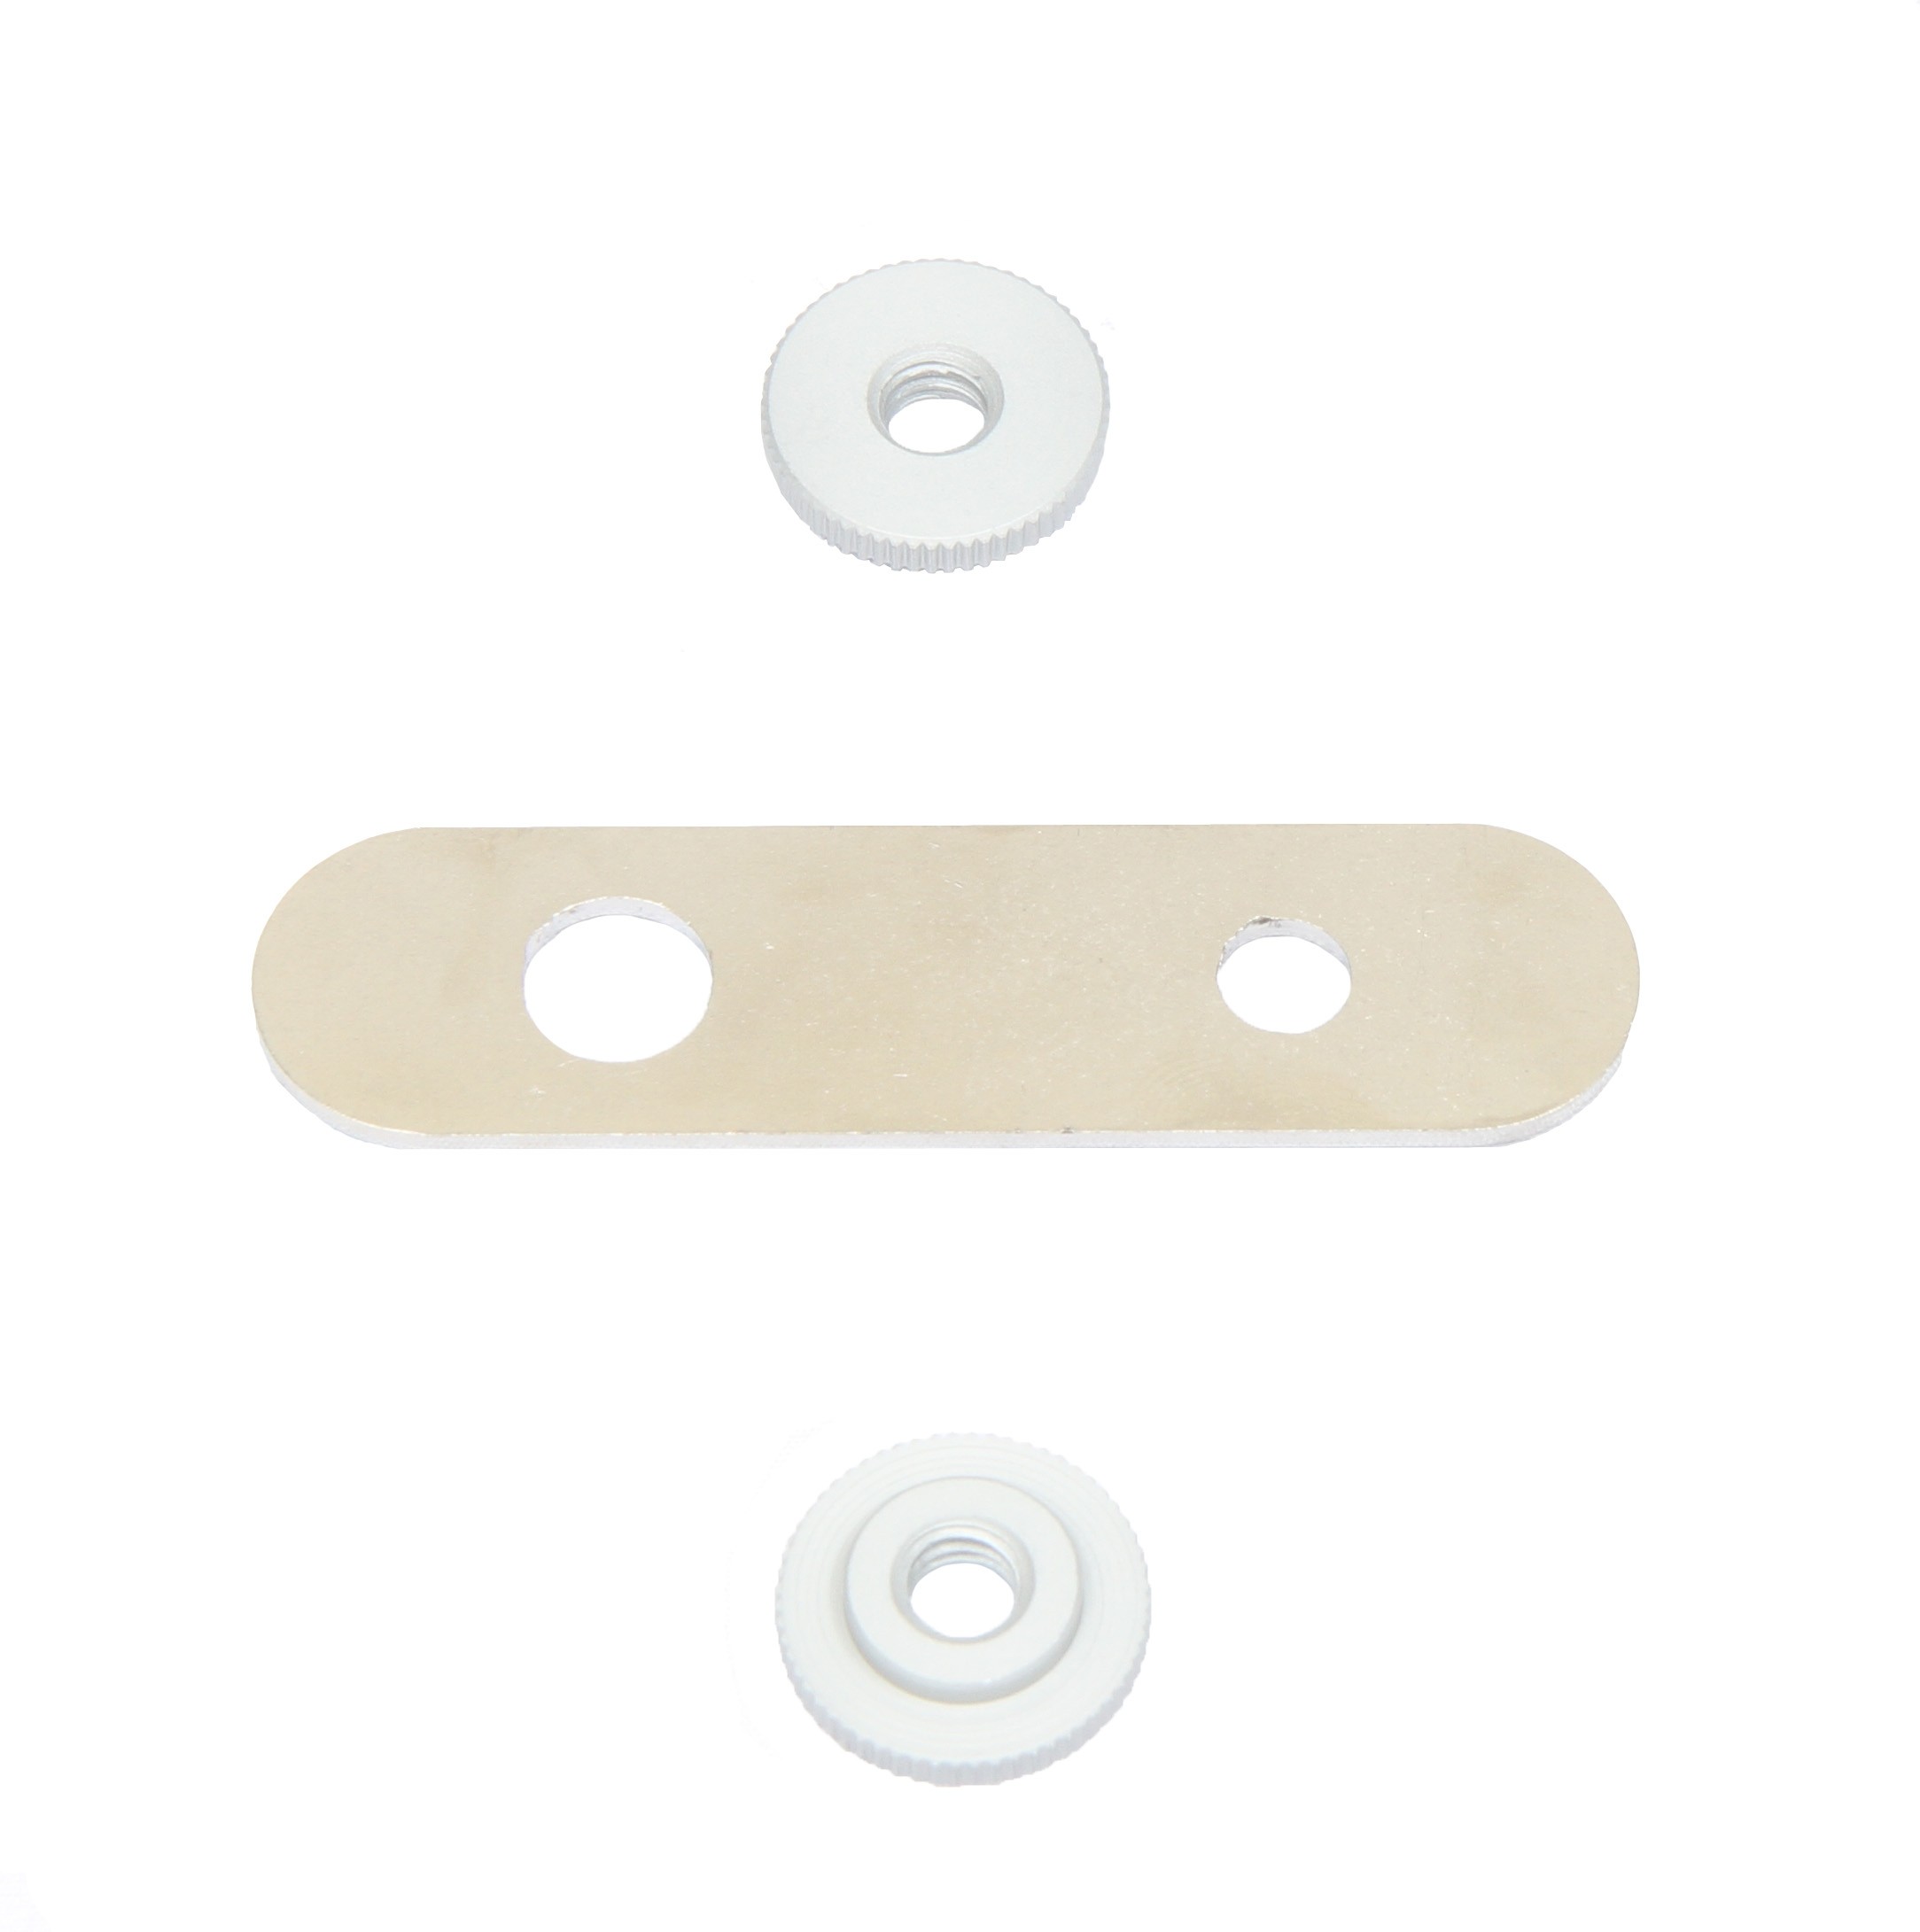 Adapter Plate & Nut for IAQ Stand